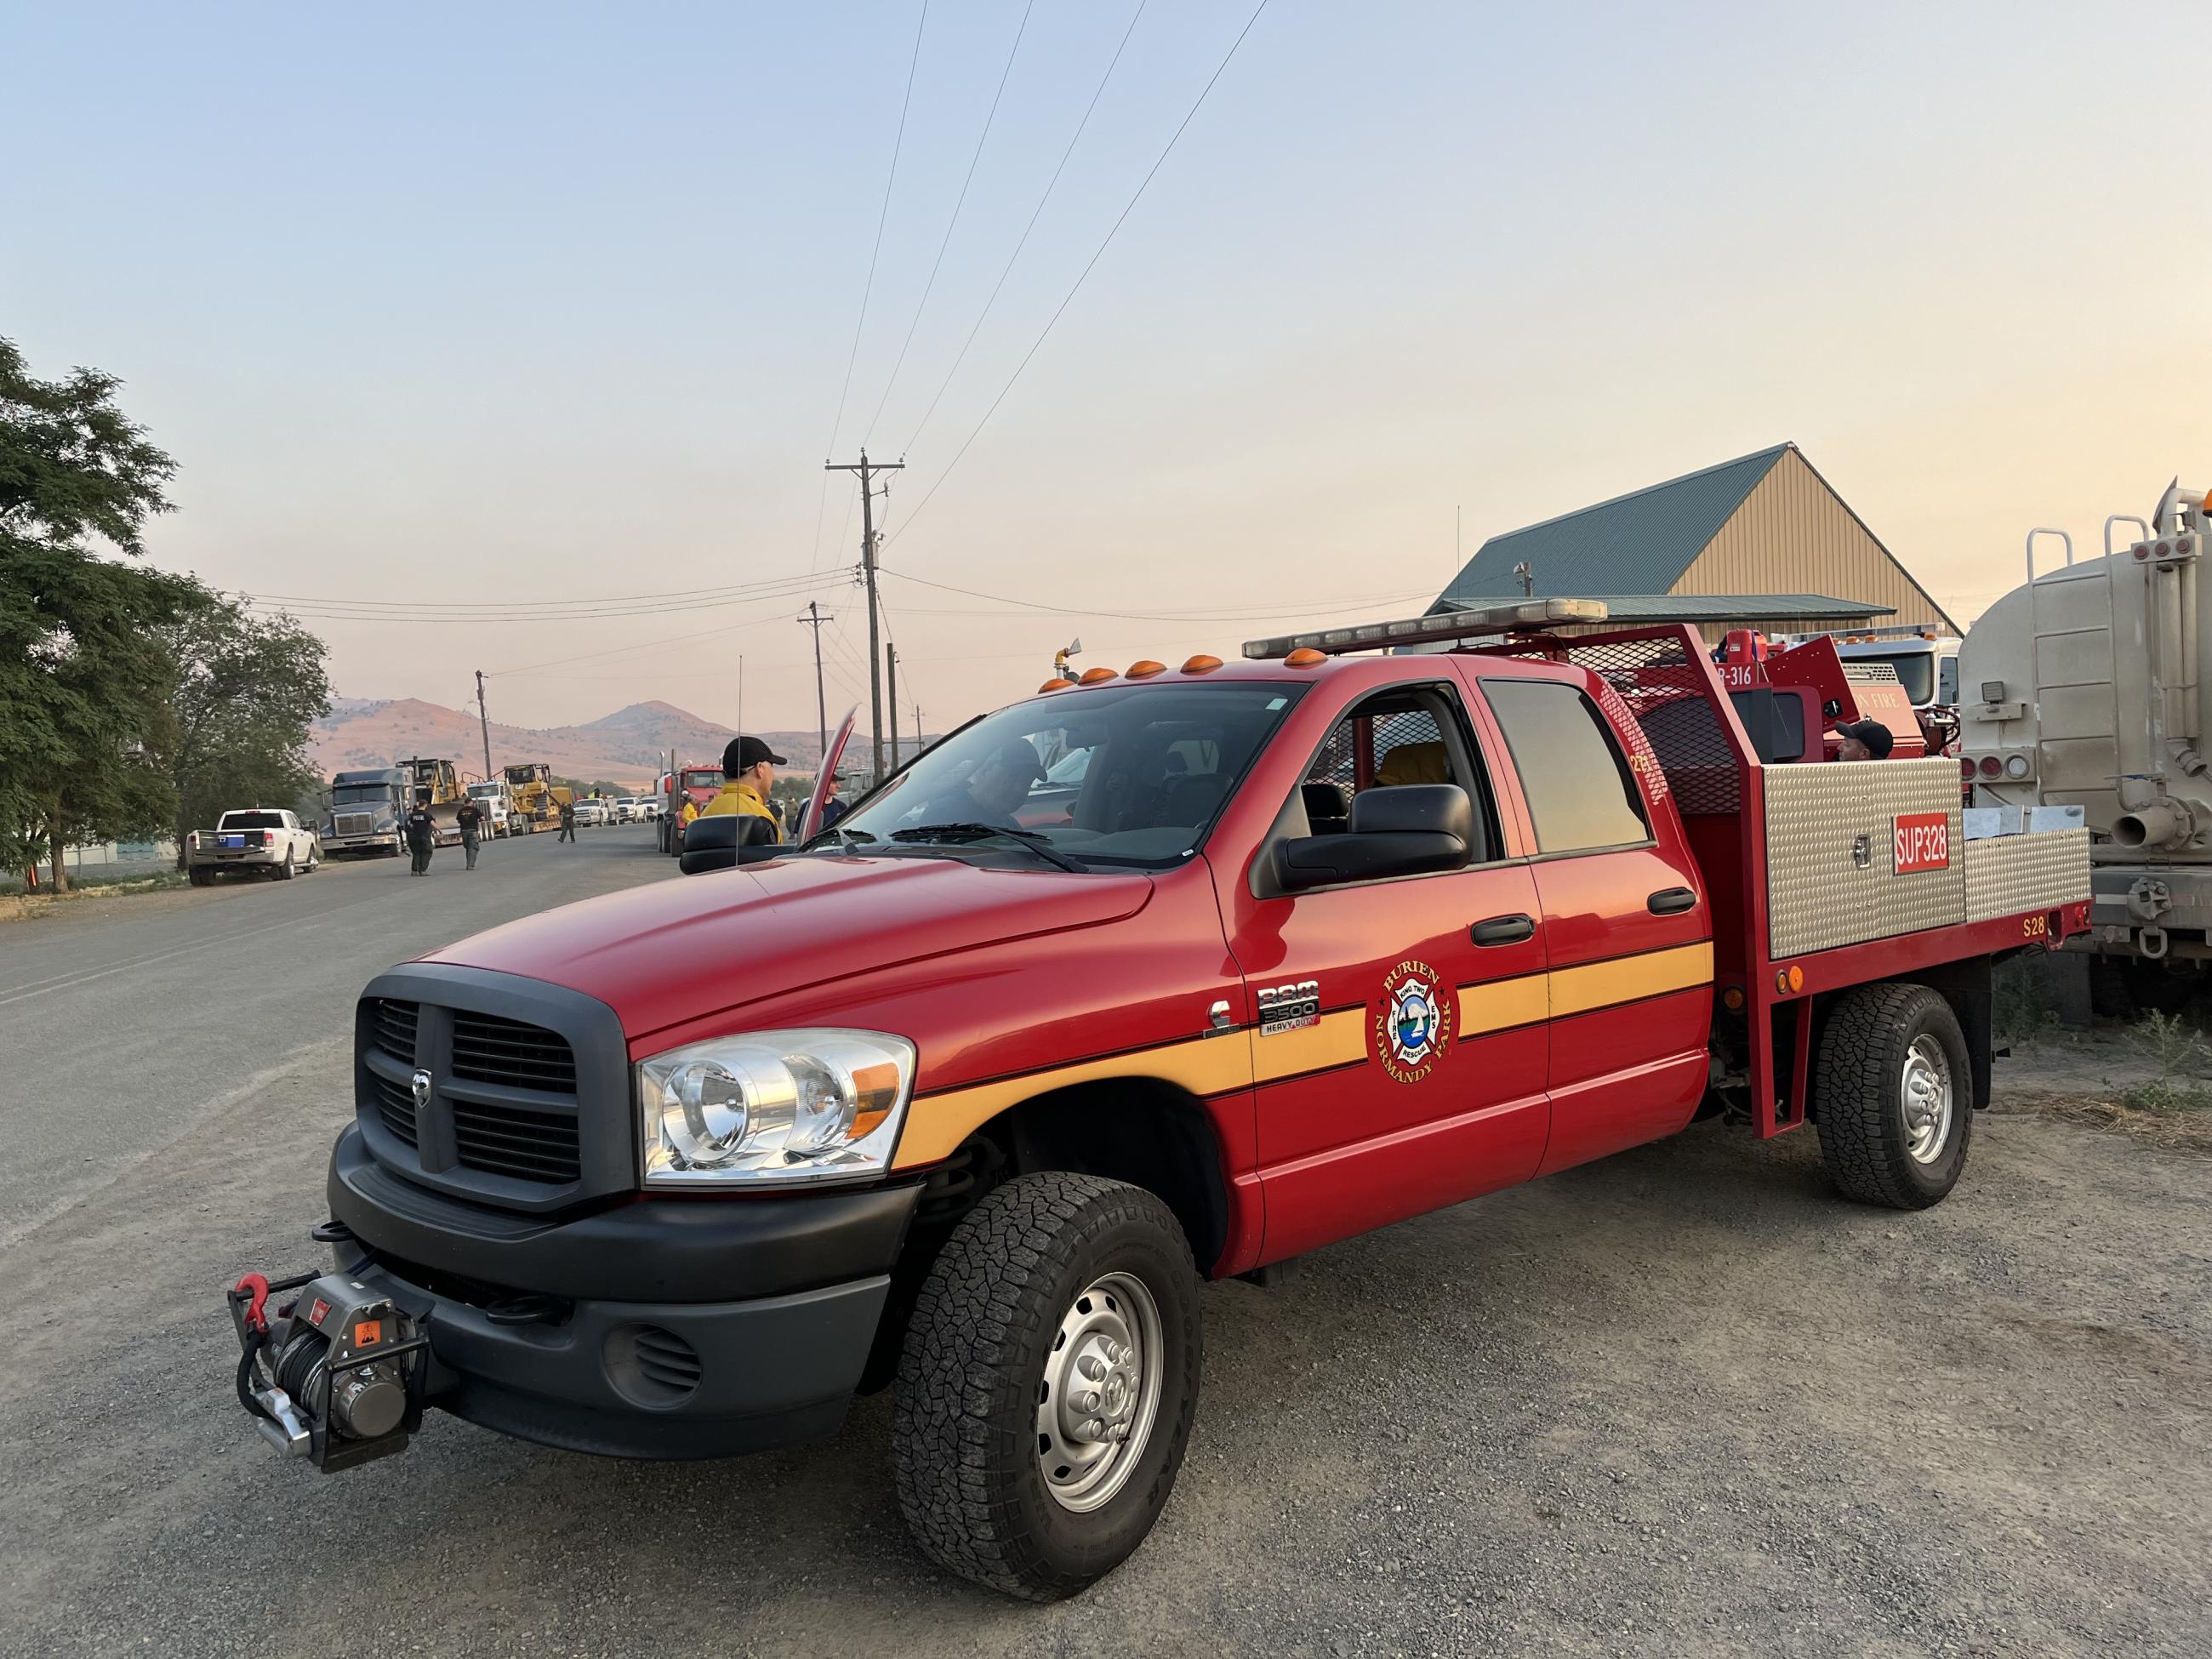 Crews prepare for morning briefing in Durkee, OR